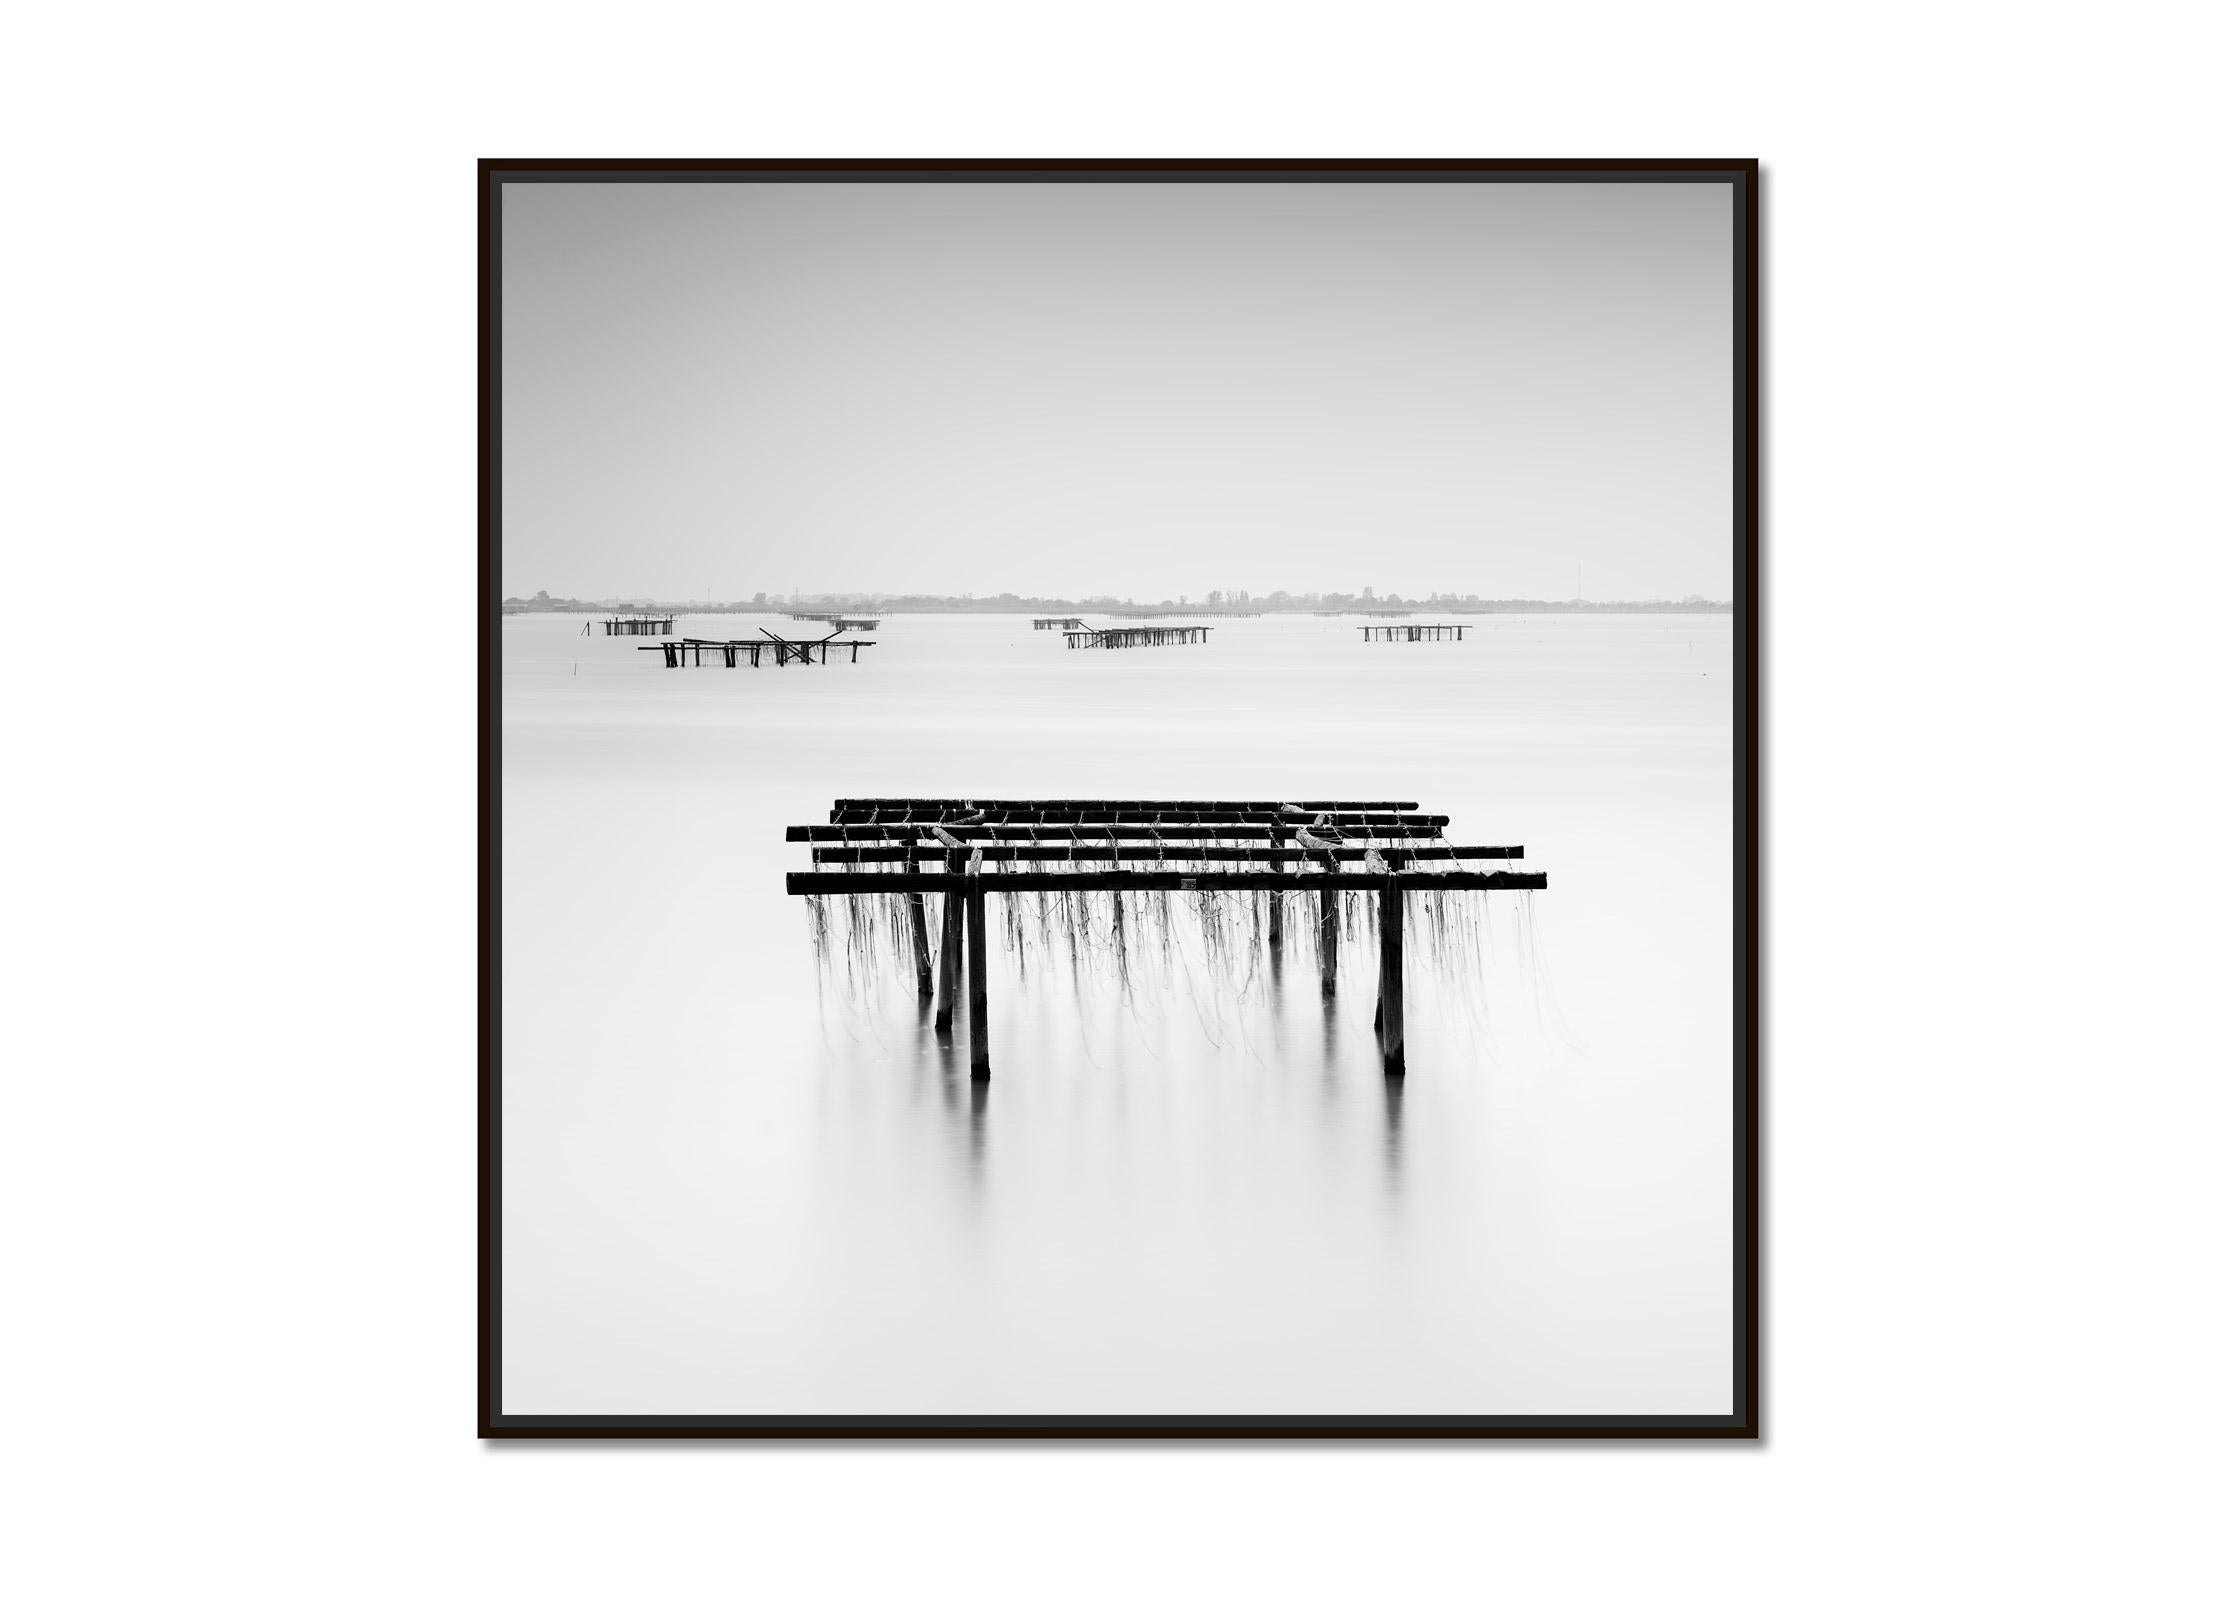 Aquaculture Structures, del delta del Po, black and white landscape photography - Photograph by Gerald Berghammer